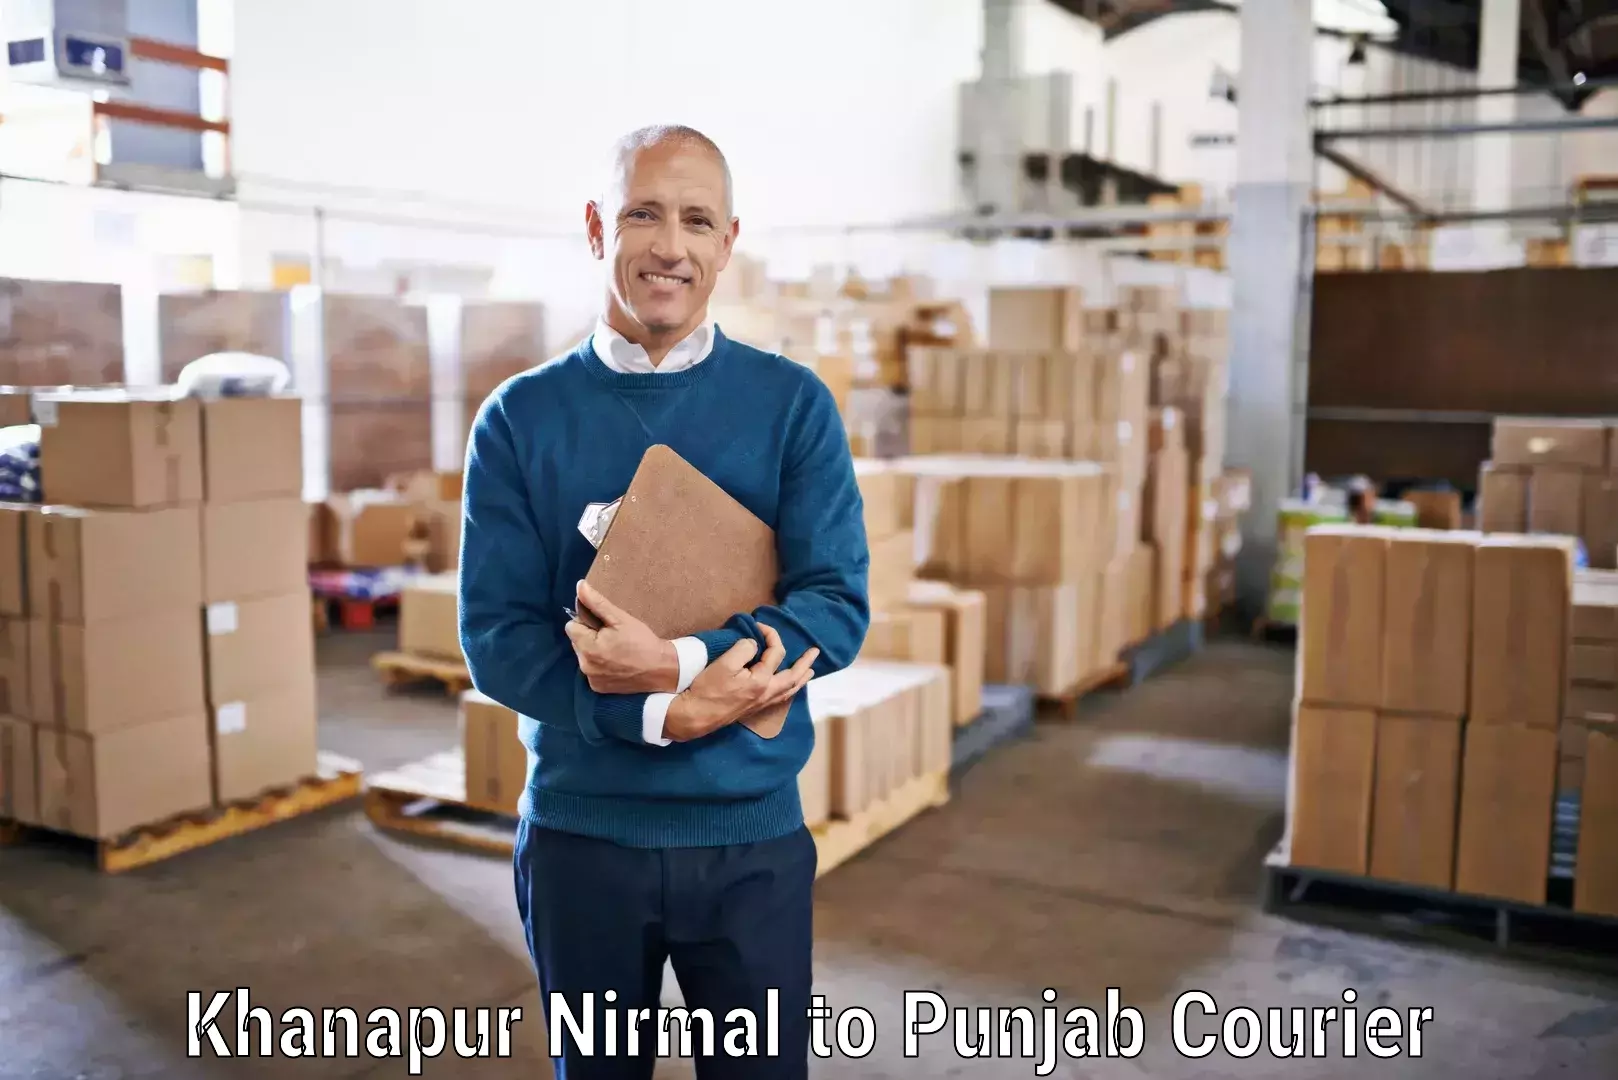 Personalized courier experiences in Khanapur Nirmal to Faridkot